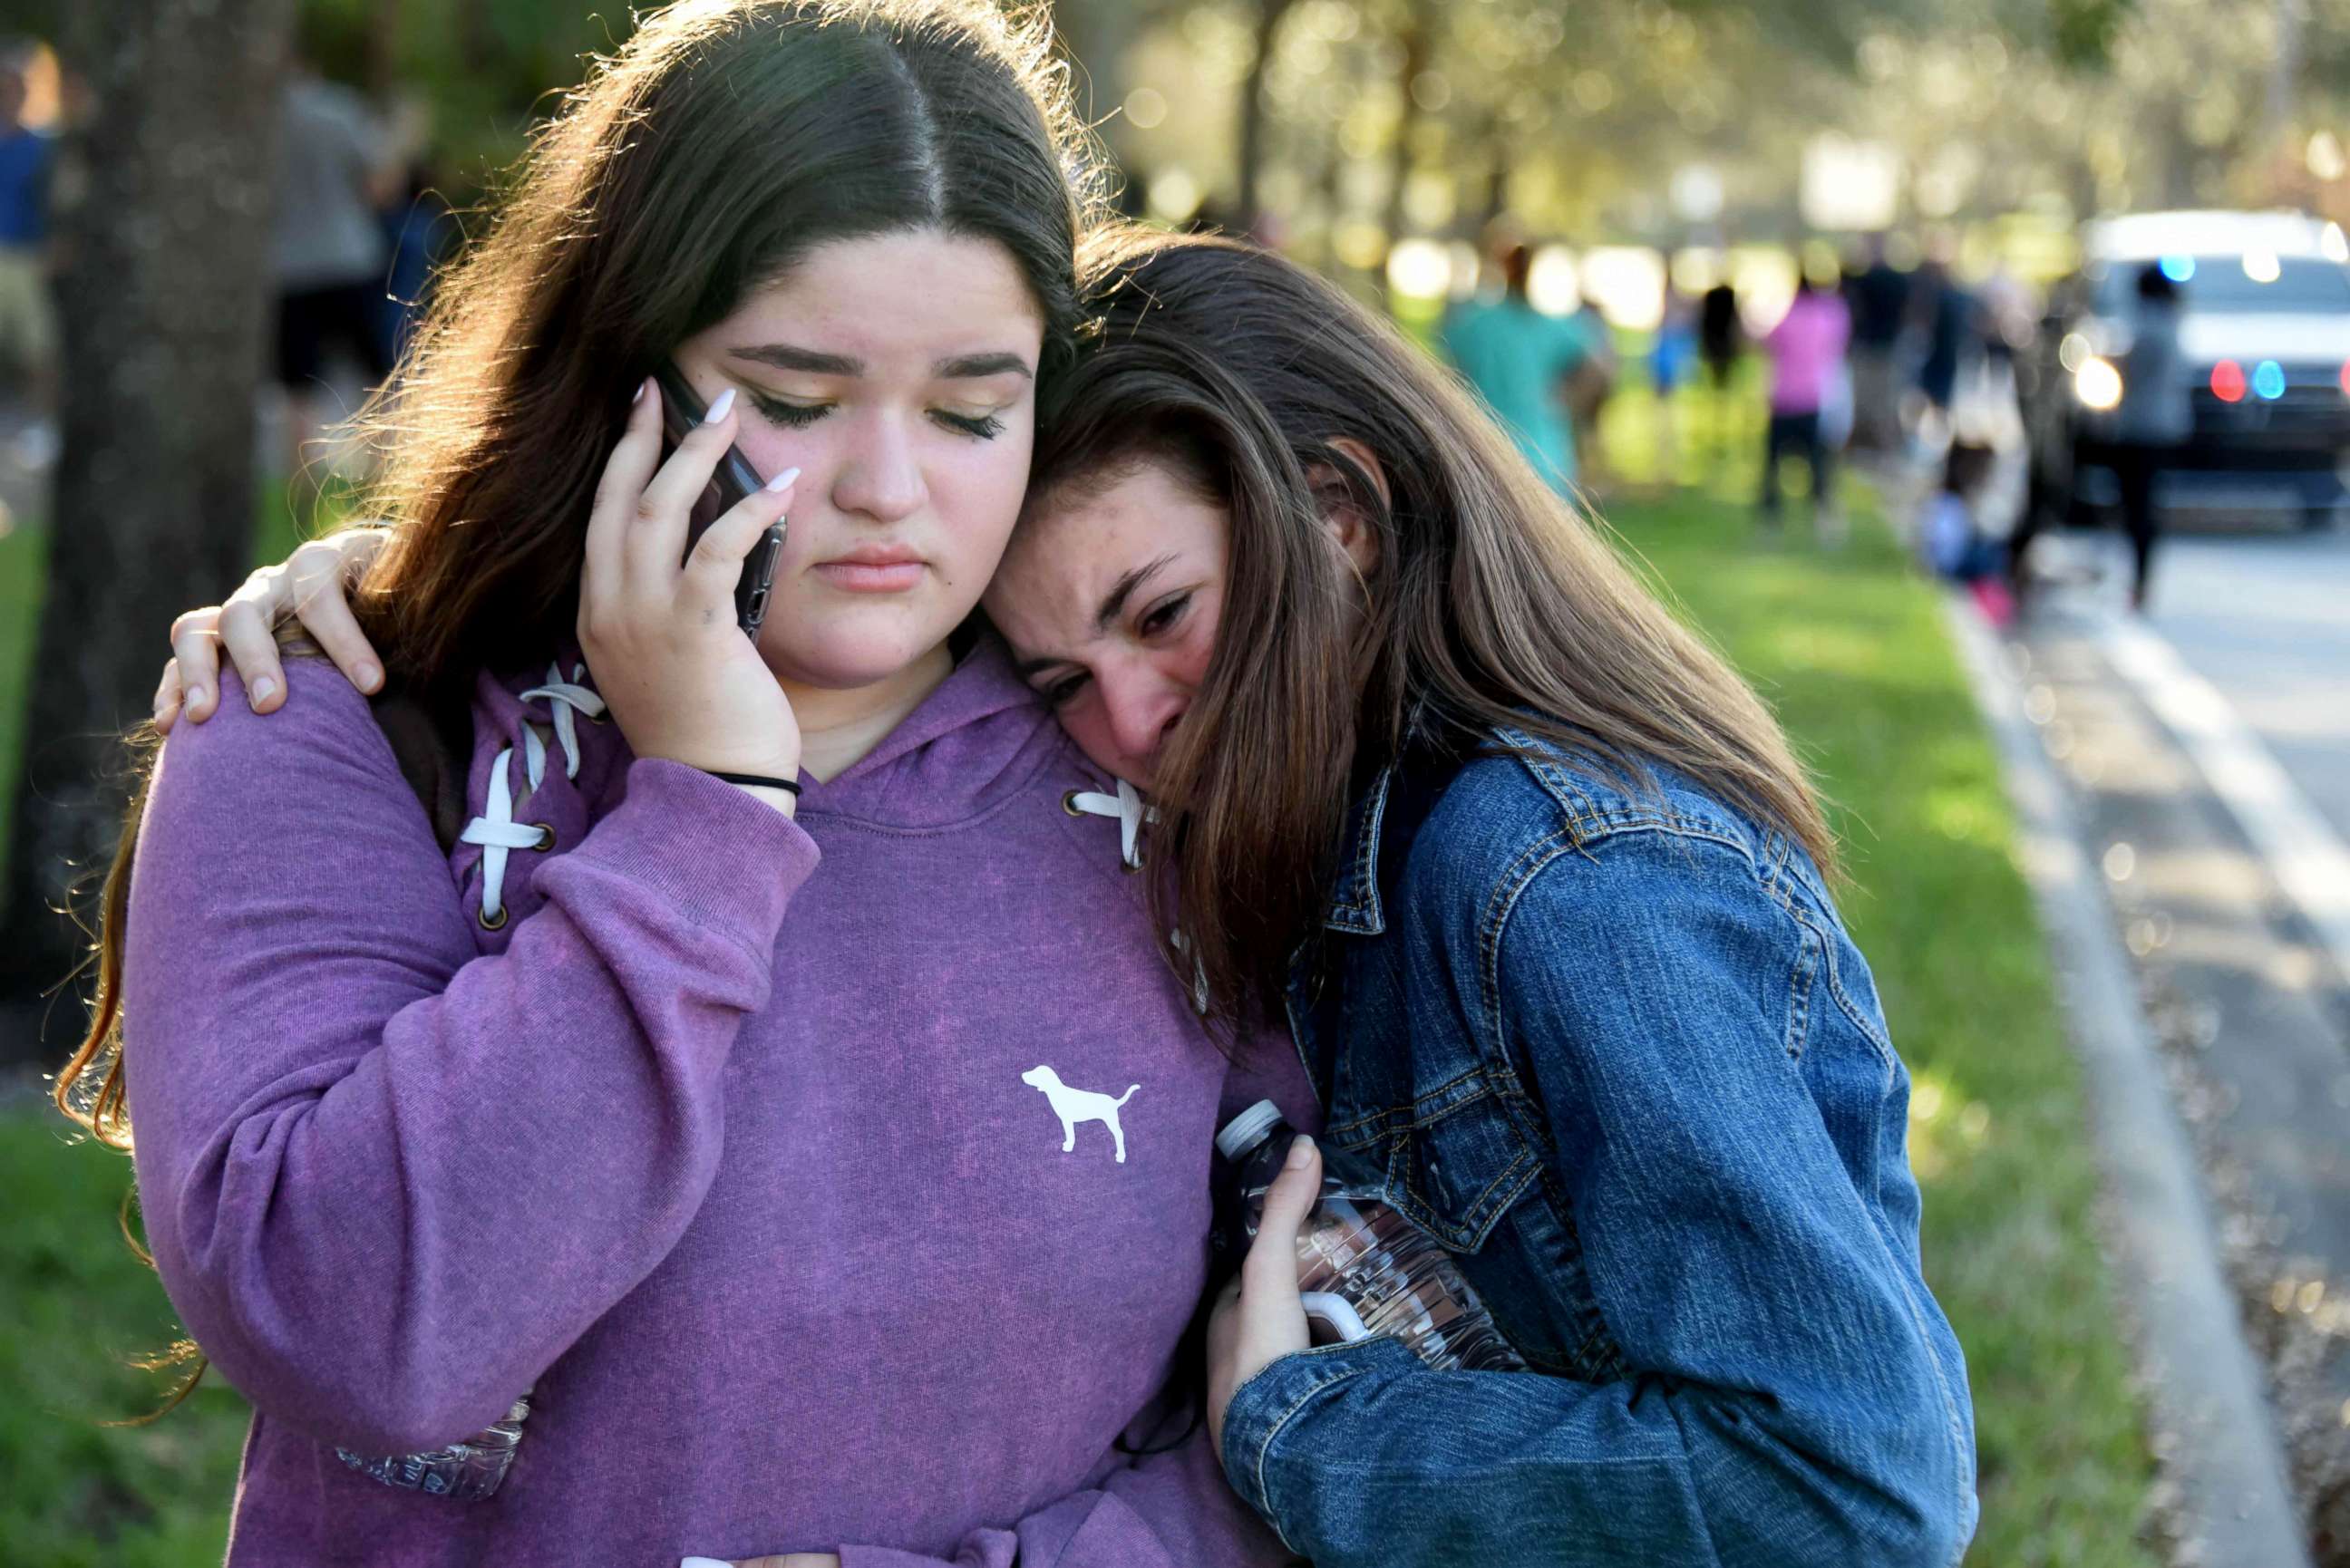 PHOTO: Students react following a shooting at Marjory Stoneman Douglas High School in Parkland, Fla., Feb. 14, 2018.